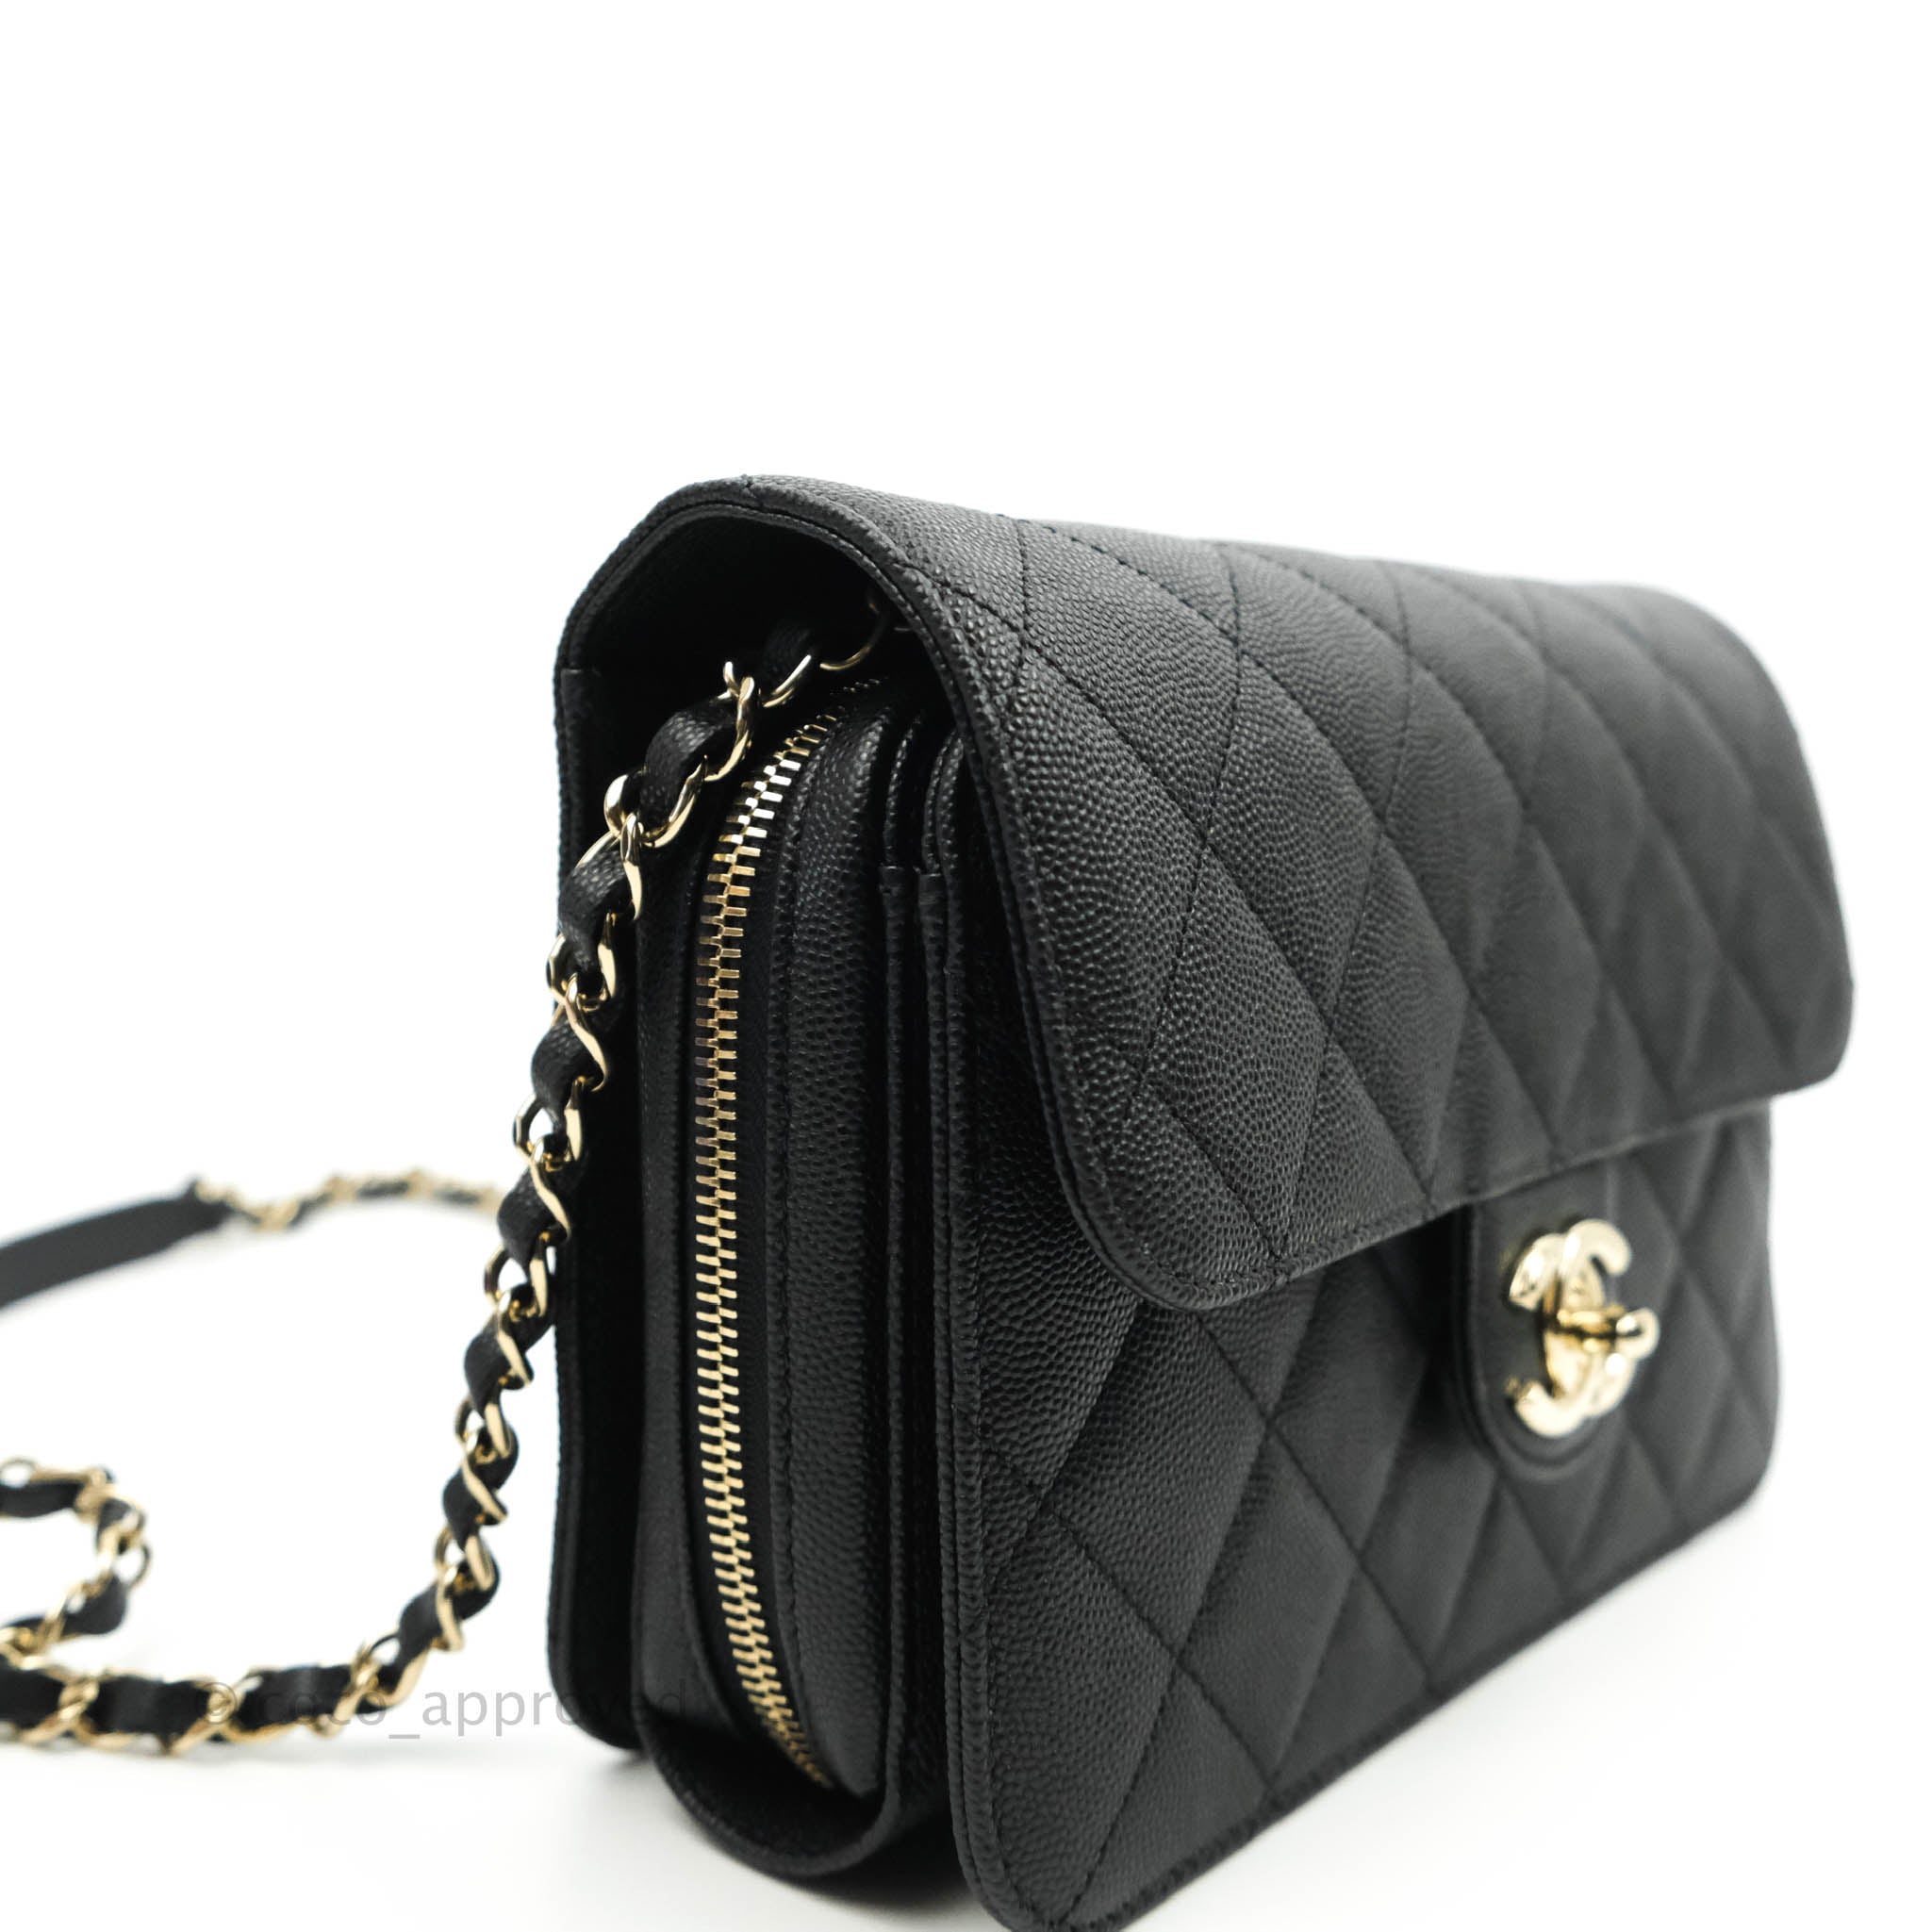 CHANEL Caviar Quilted Compact Flap Wallet Black 173226